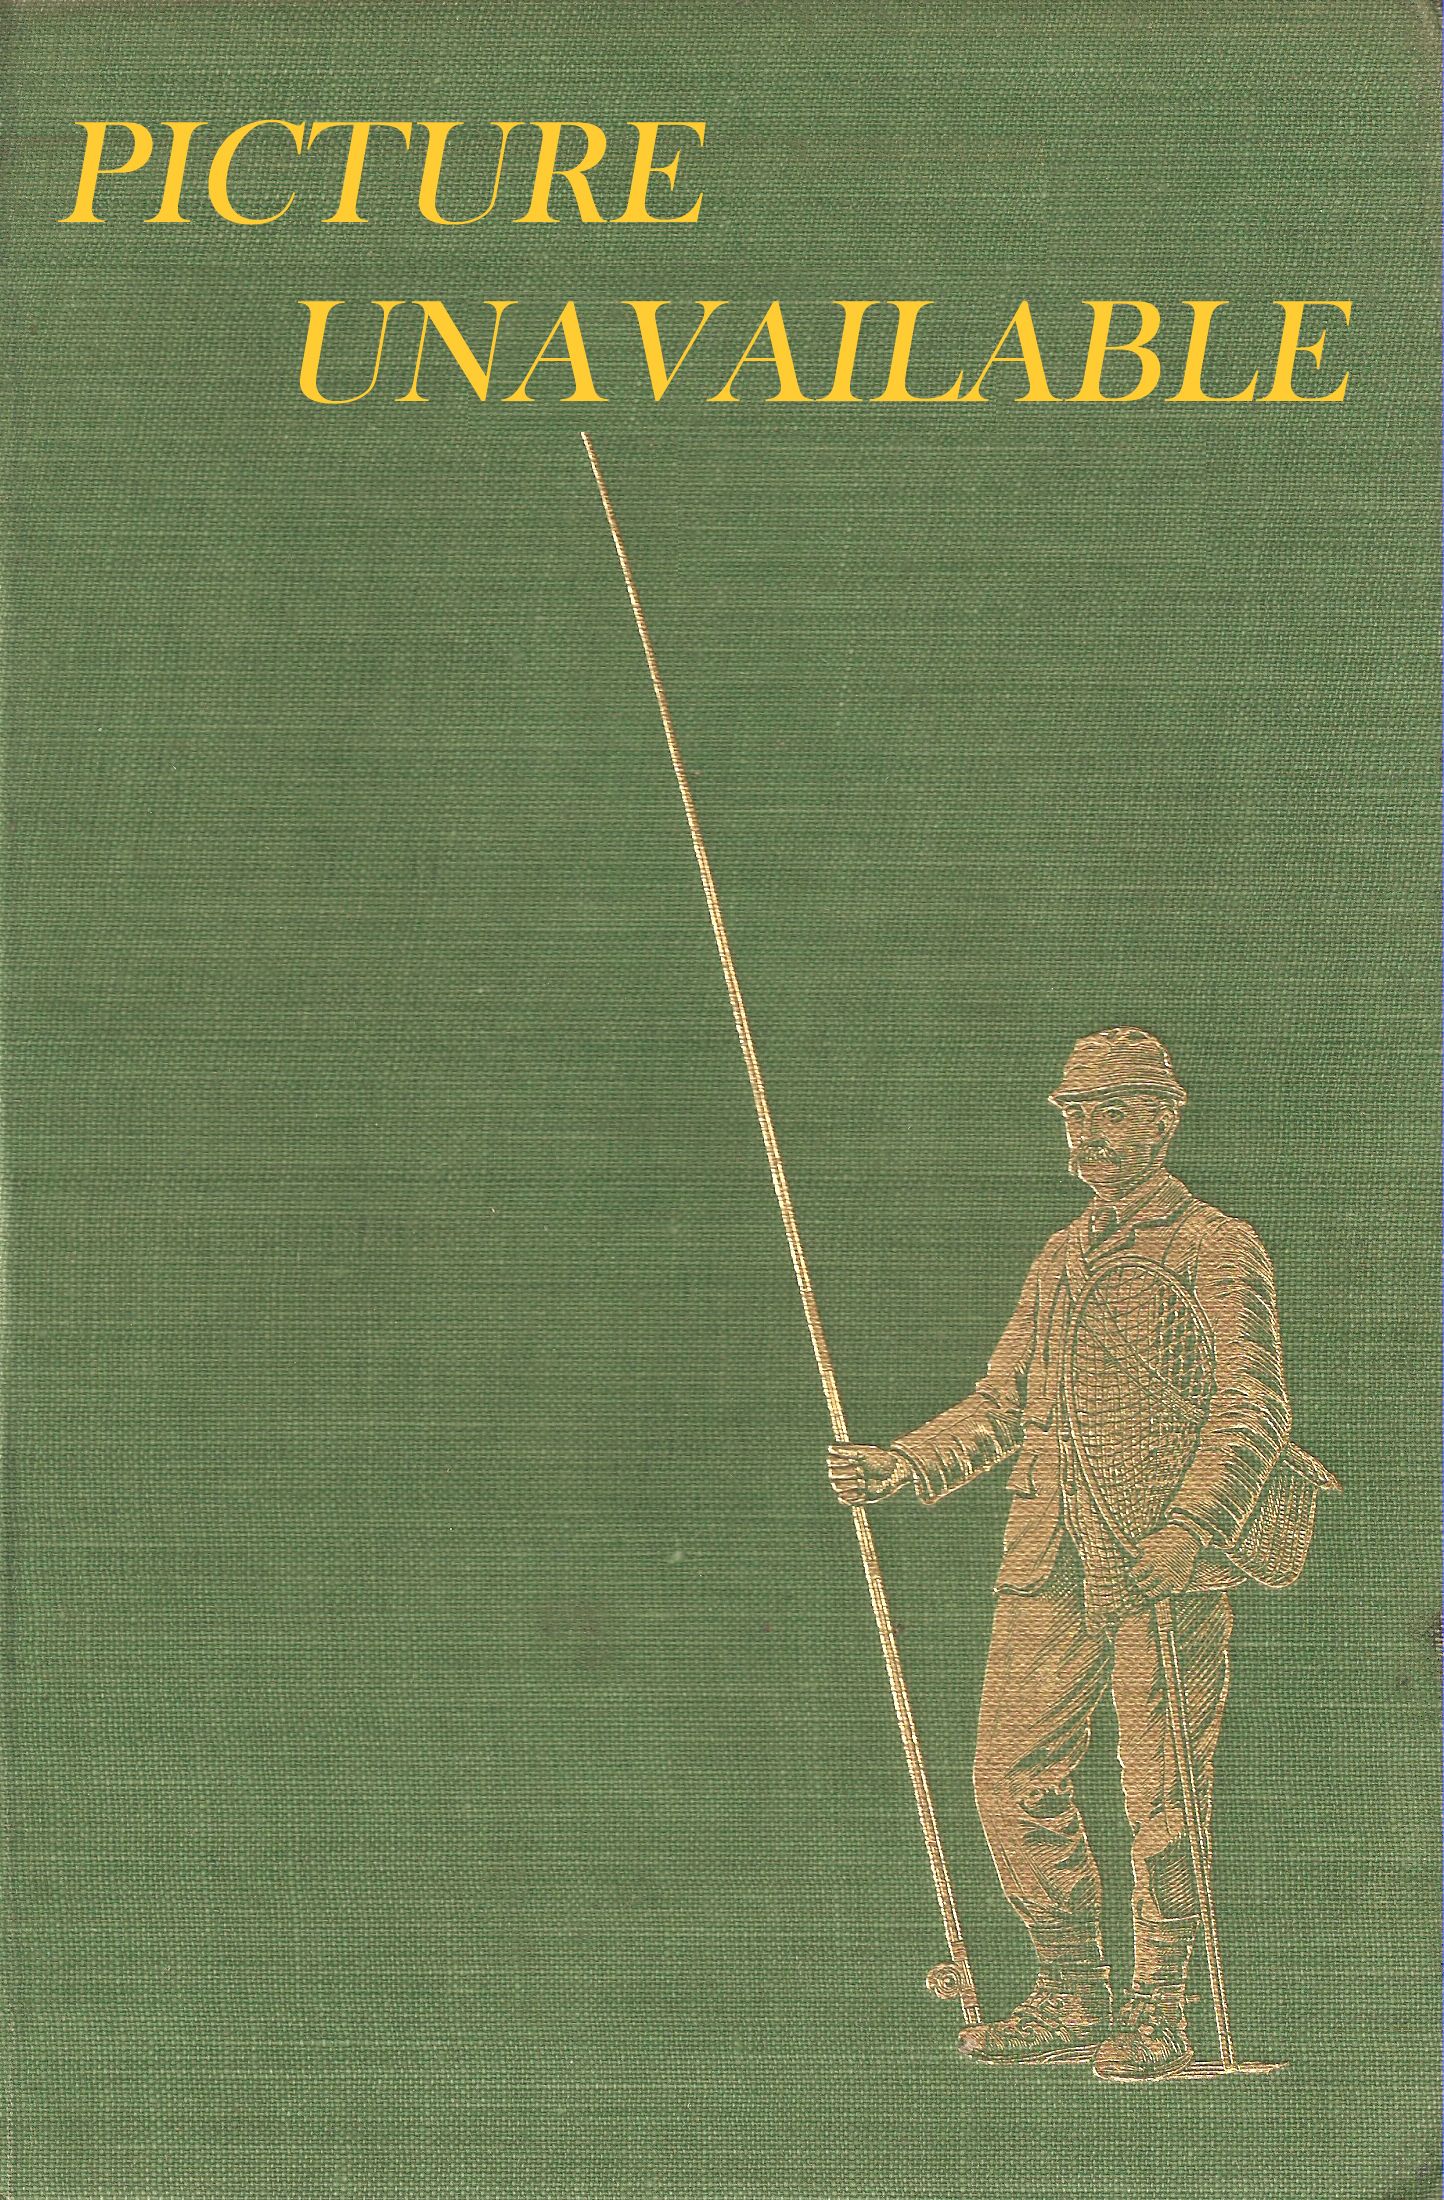 THE ART OF ANGLING (IN THREE VOLUMES). Edited by Kenneth Mansfield.